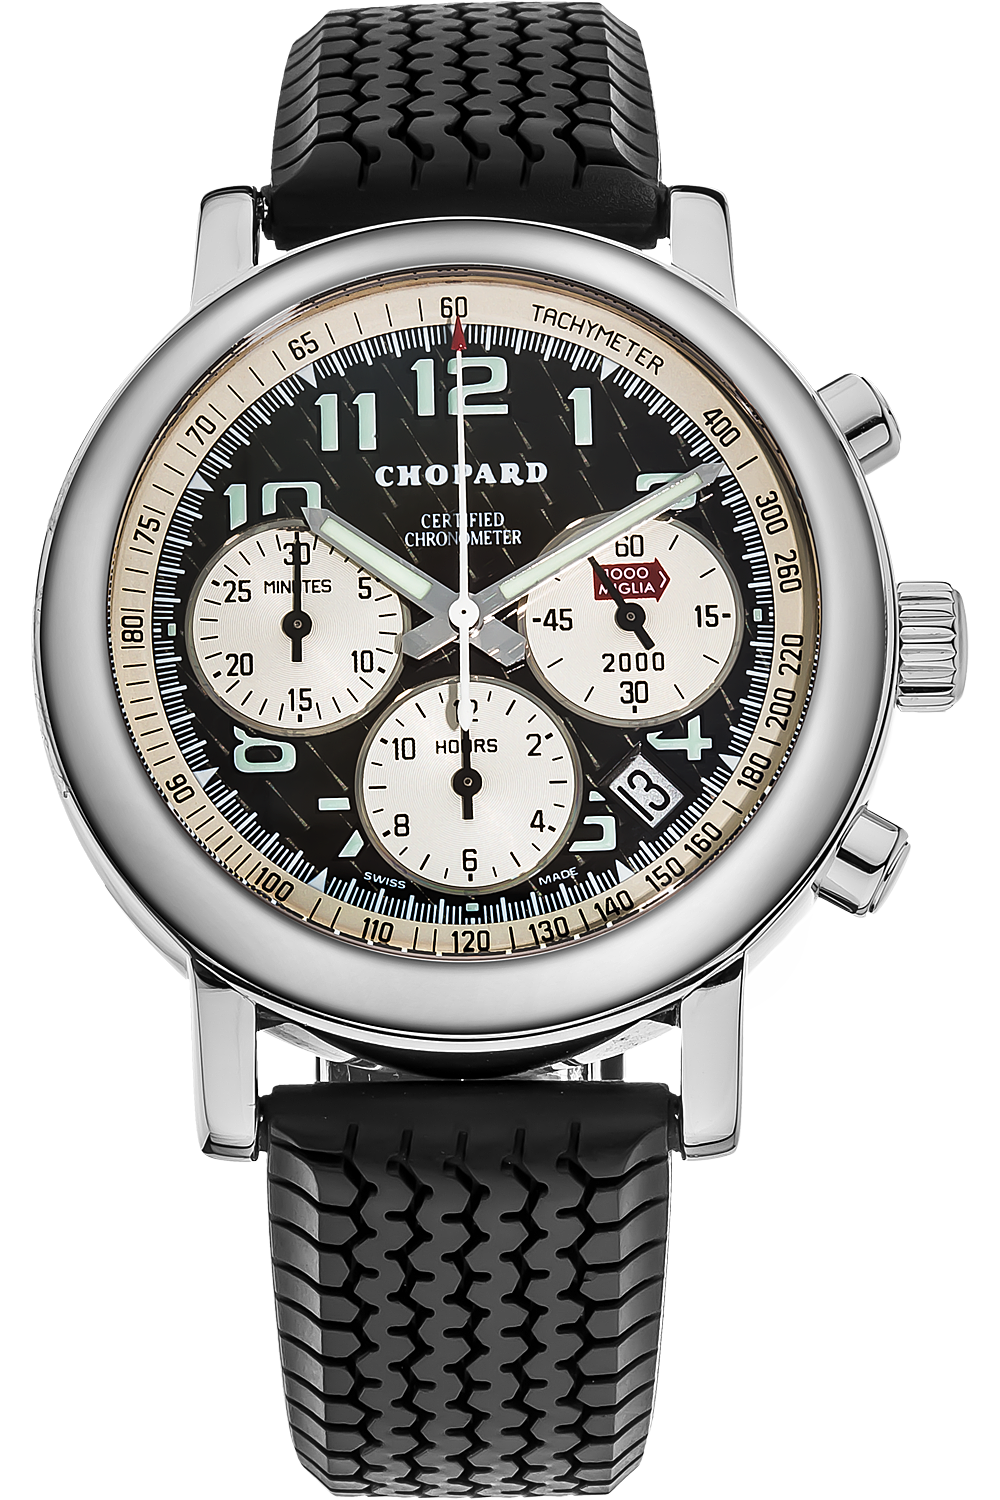 Chopard Mille Miglia – Collection of luxurious watches for men